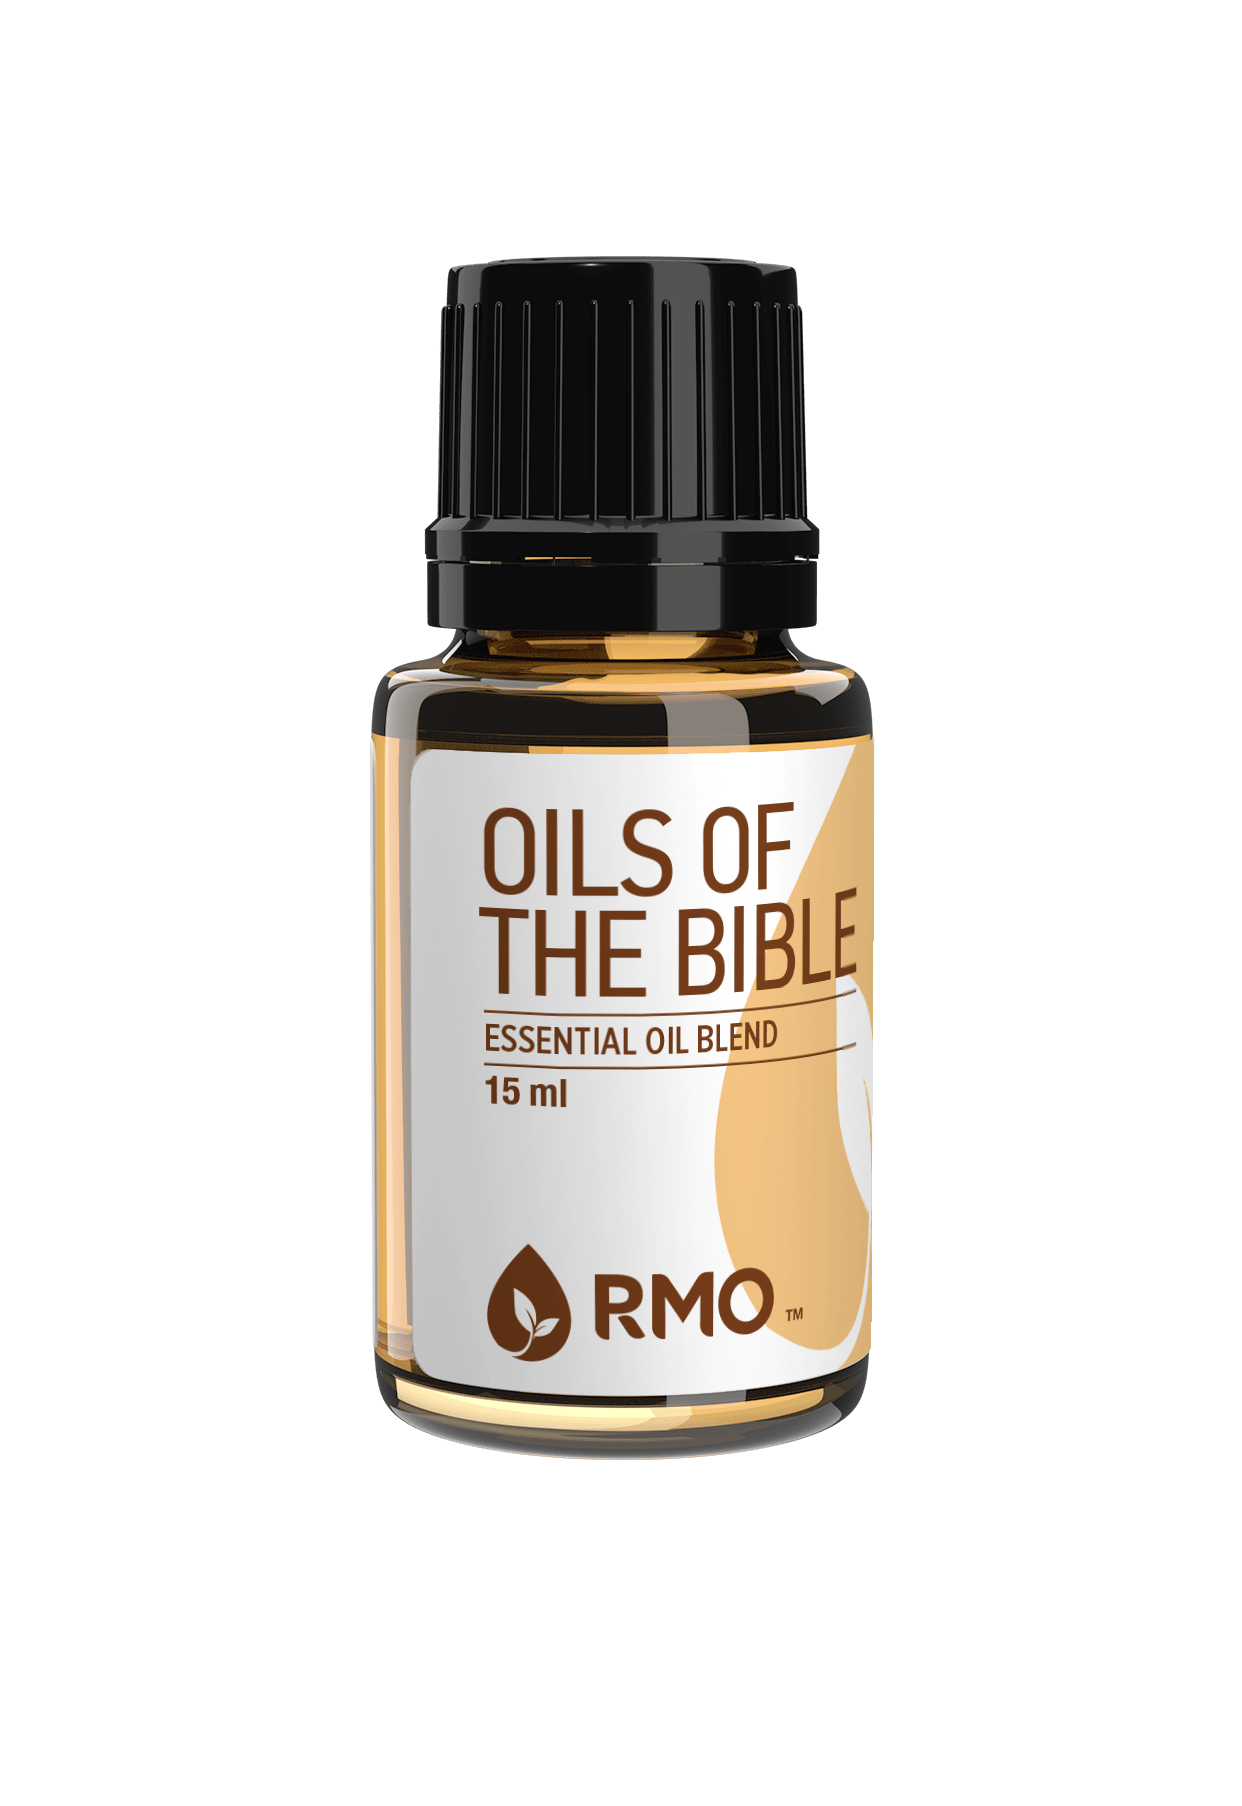 rocky mountain oils, essential oils, oils of the bible